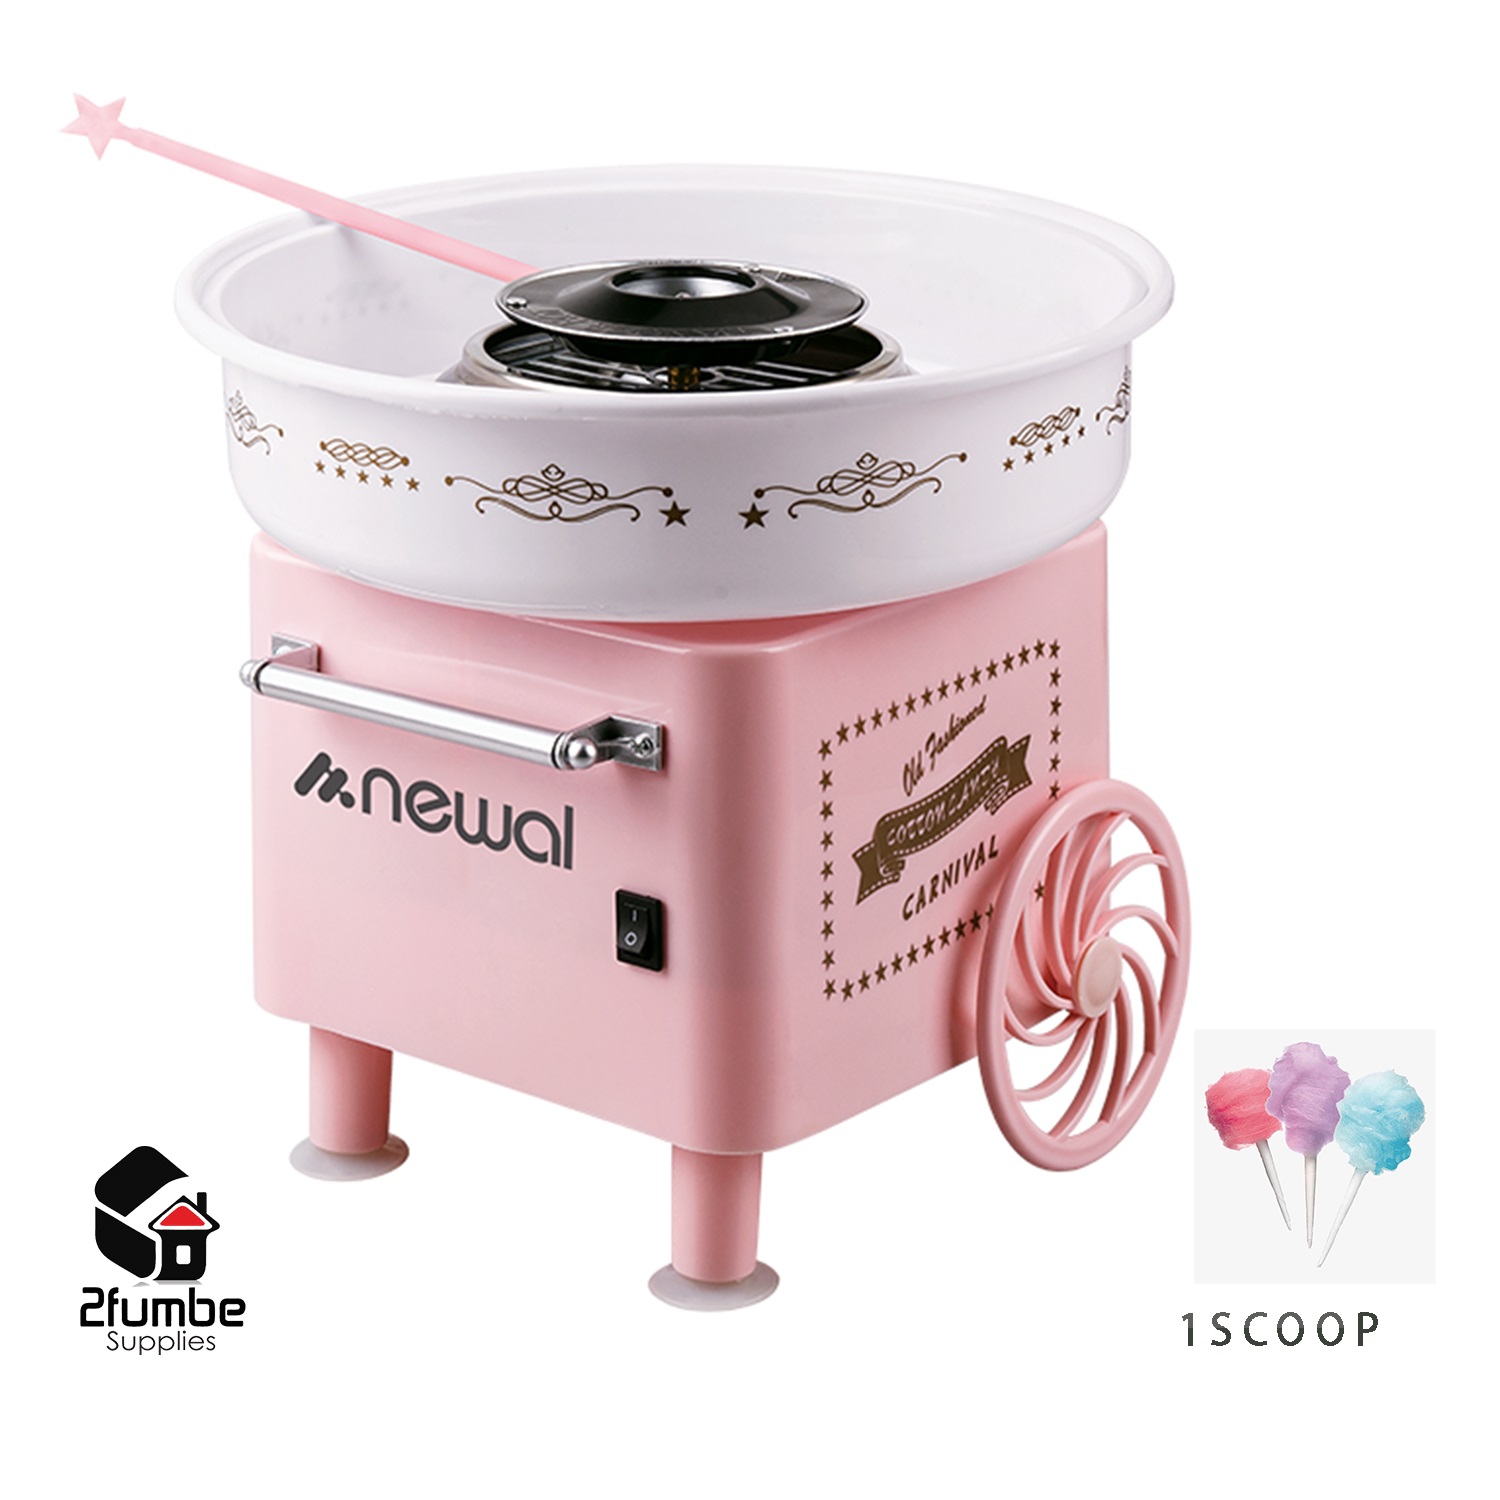 Newal Electric Cotton candy Machine-2fumbe Beverage appliances